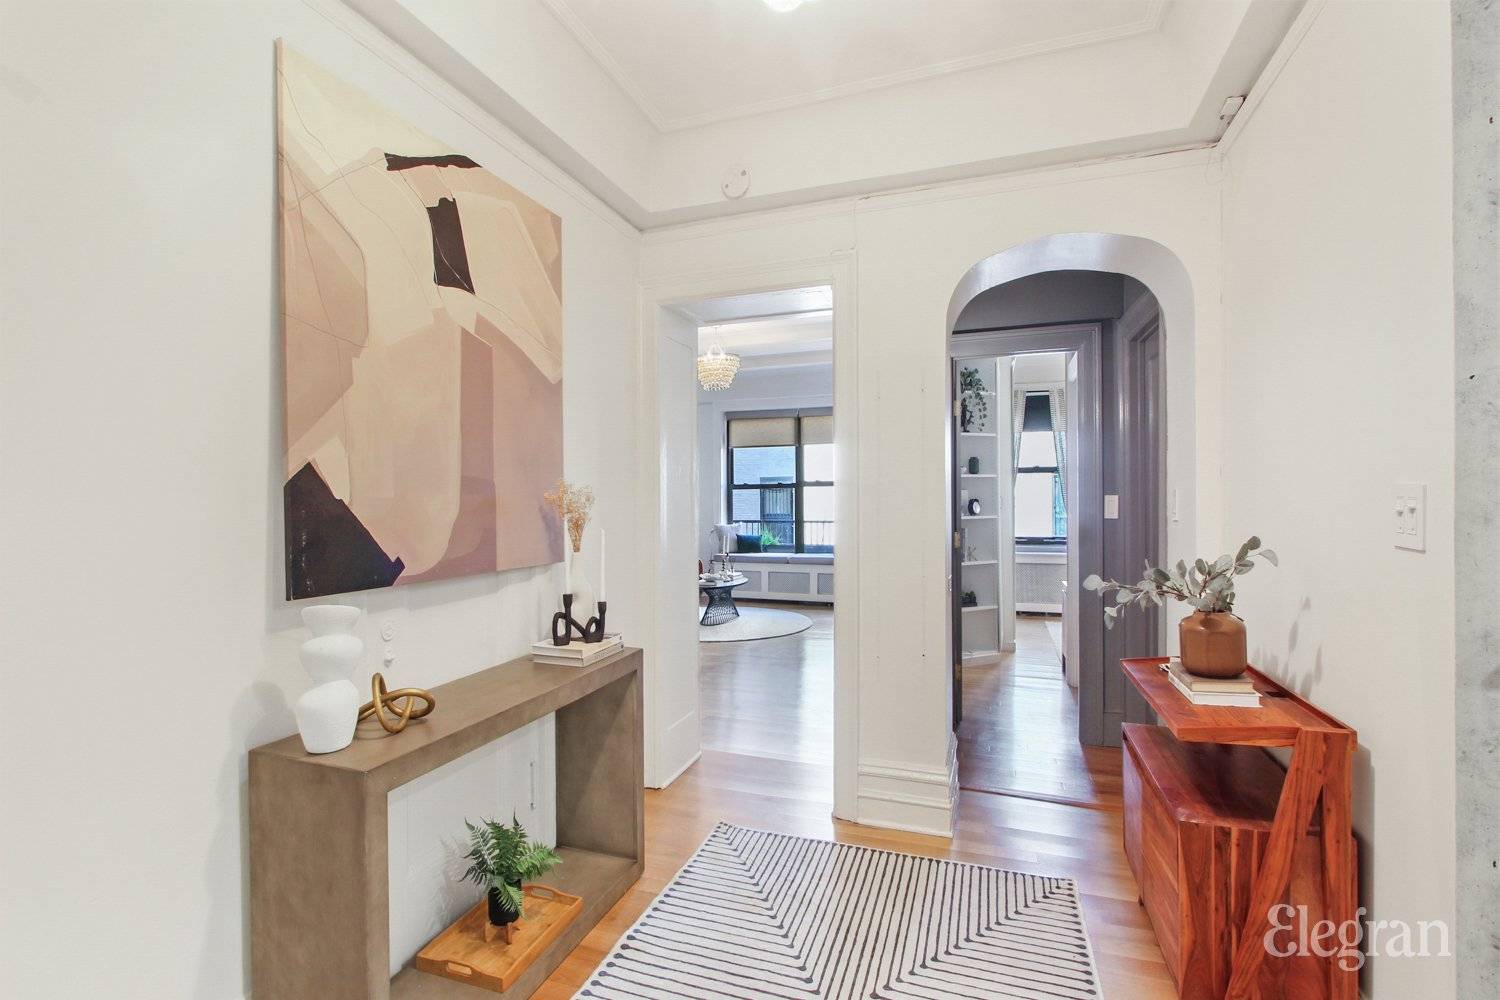 Timeless Yet Modern Beauty Step into the epitome of timeless luxury living at 345 W 88th, where charm, appeal, and fabulous character converge in this tastefully renovated 2 bedroom, 1 ...